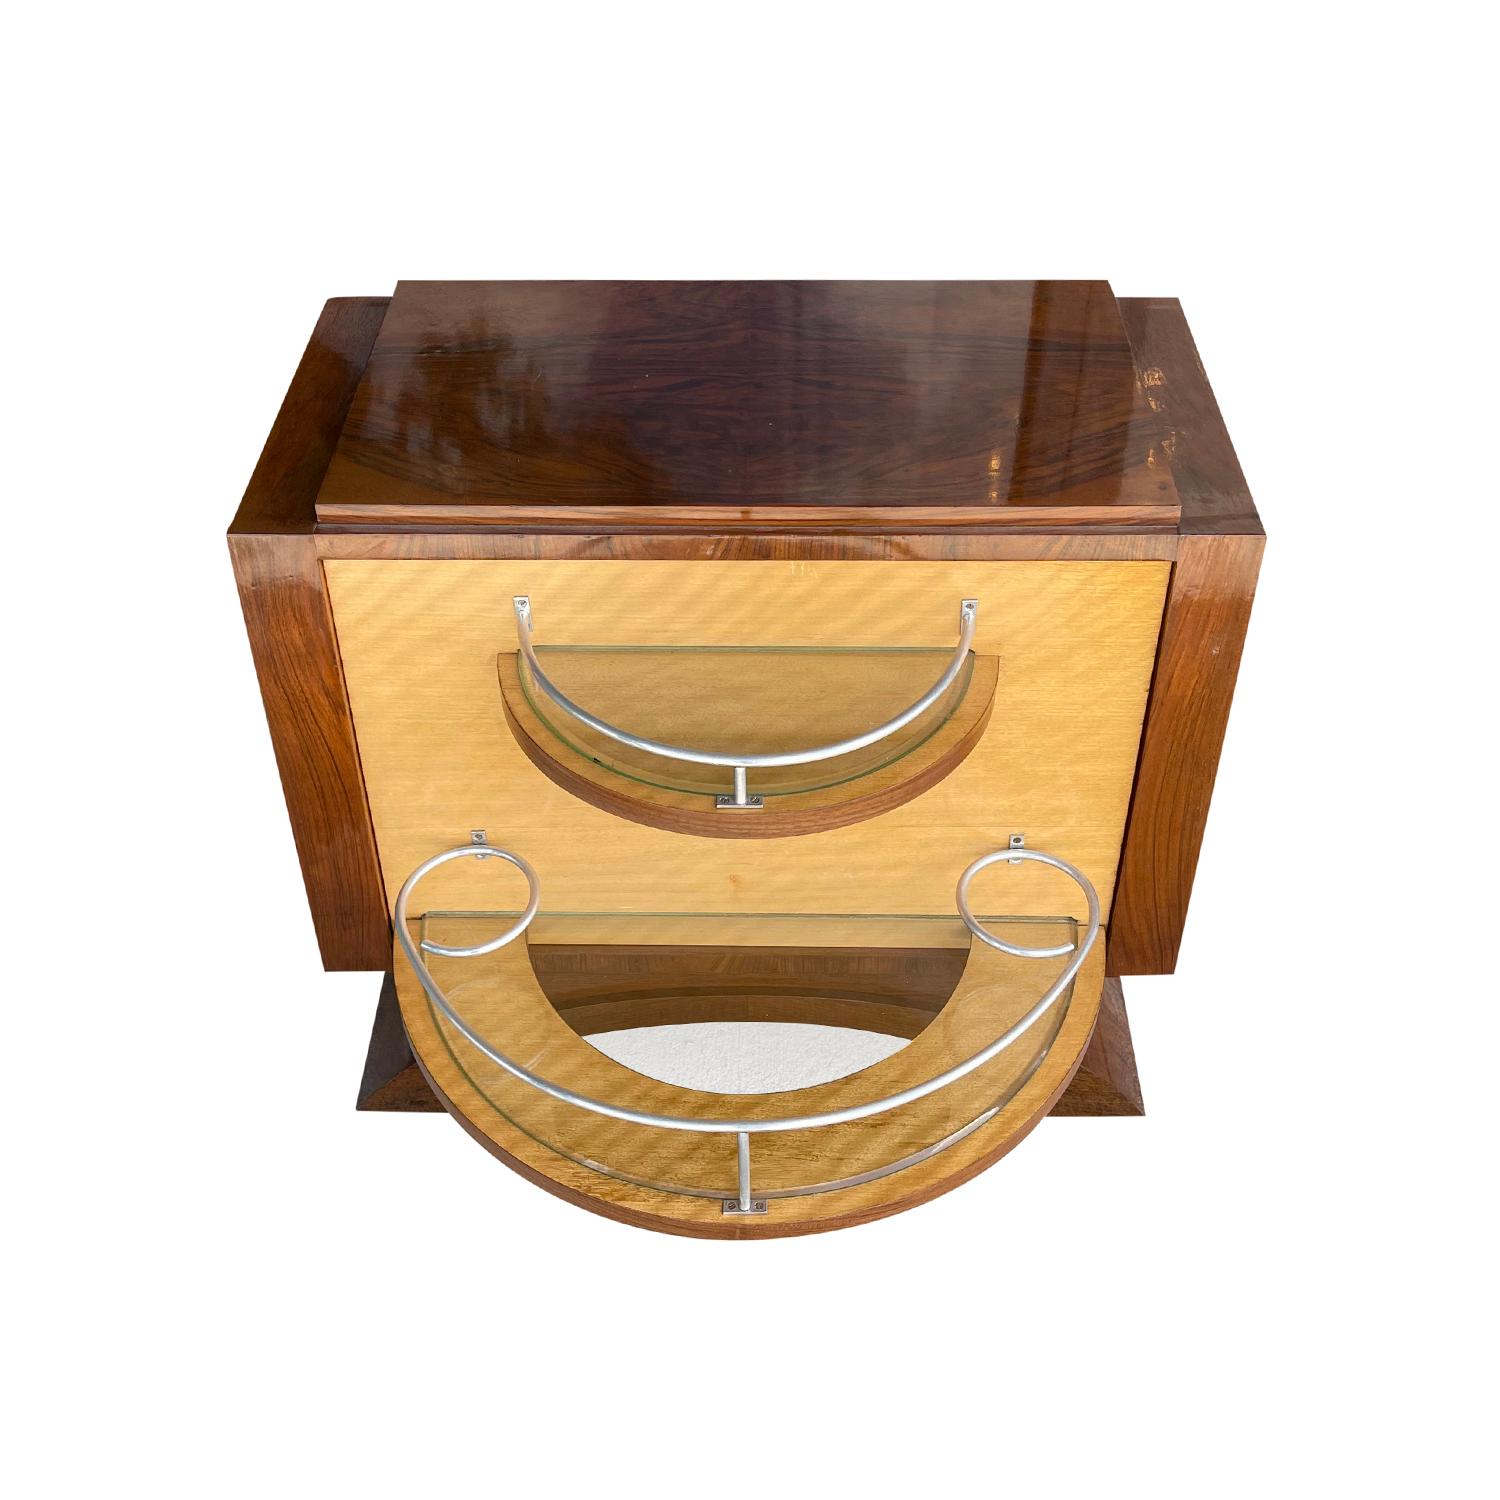 20th Century French Art Deco Walnut Dry Bar - Vintage Parisian Side Table In Good Condition For Sale In West Palm Beach, FL